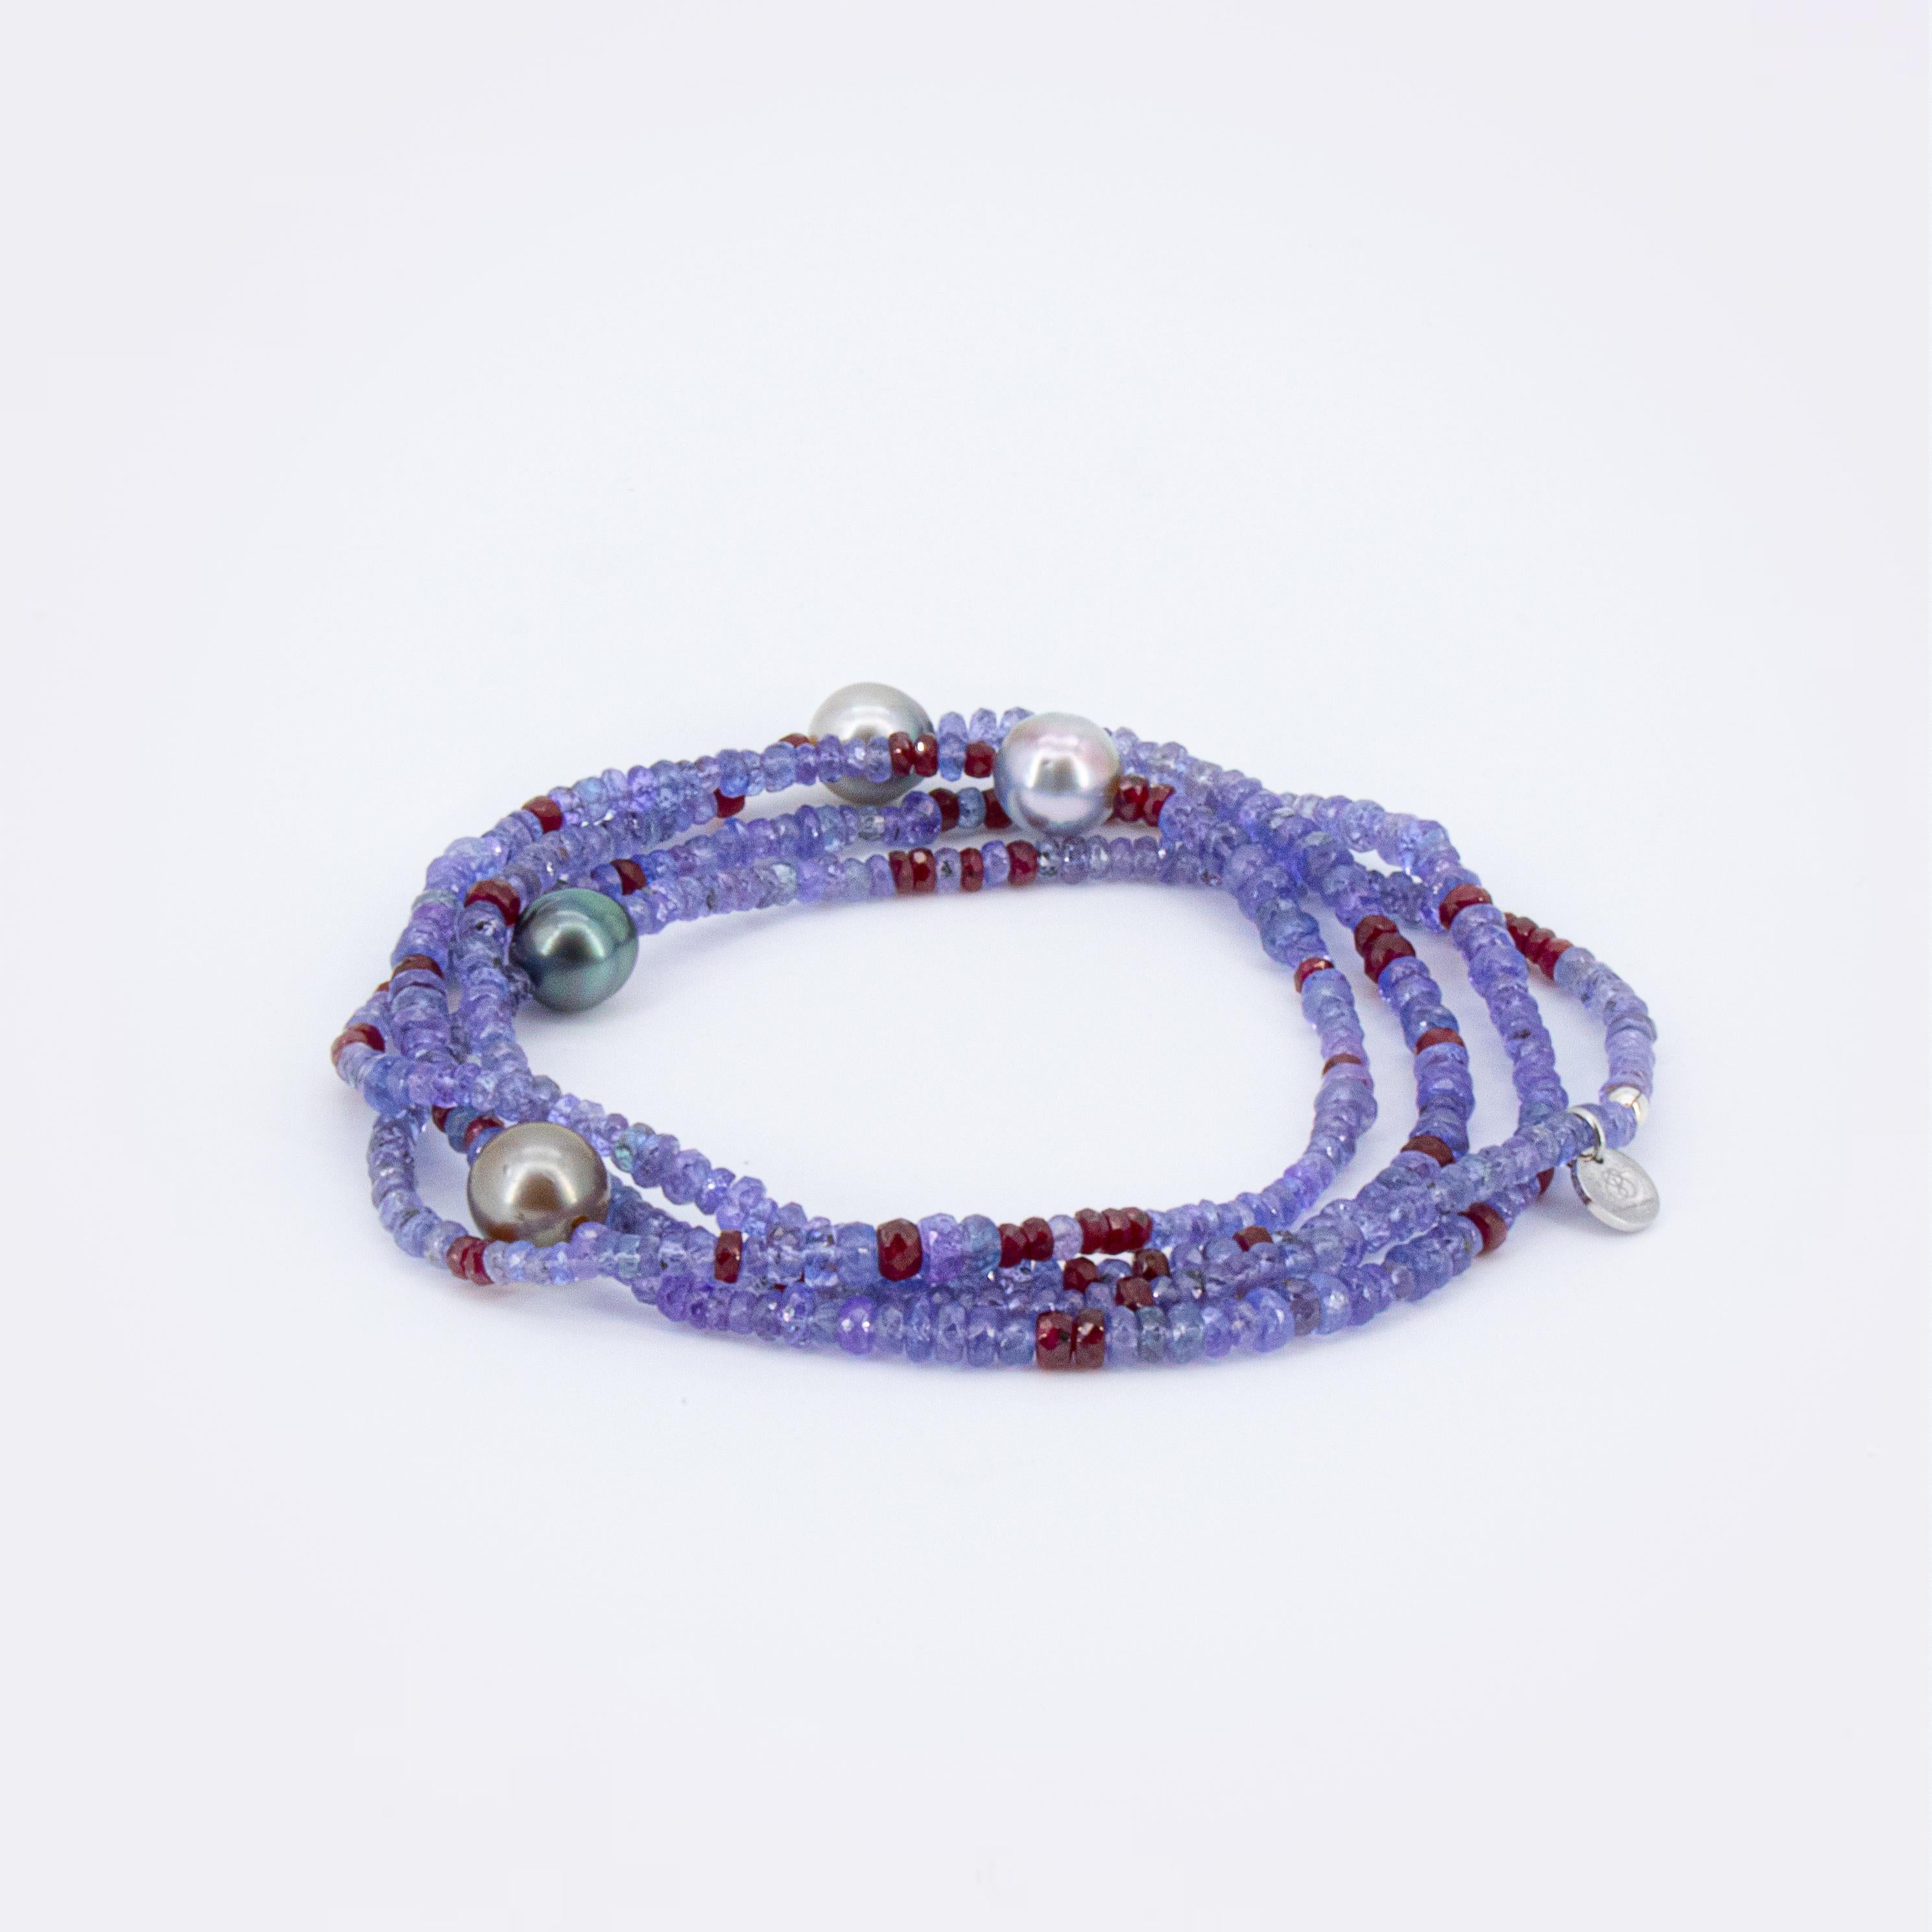 This necklace is a highlight just in the context of its meaning and the mutual support of the natural ruby with the tanzanite. The beads fit beautifully in color with this purple/red ensemble and make the stones sparkle even more. 
It has a great